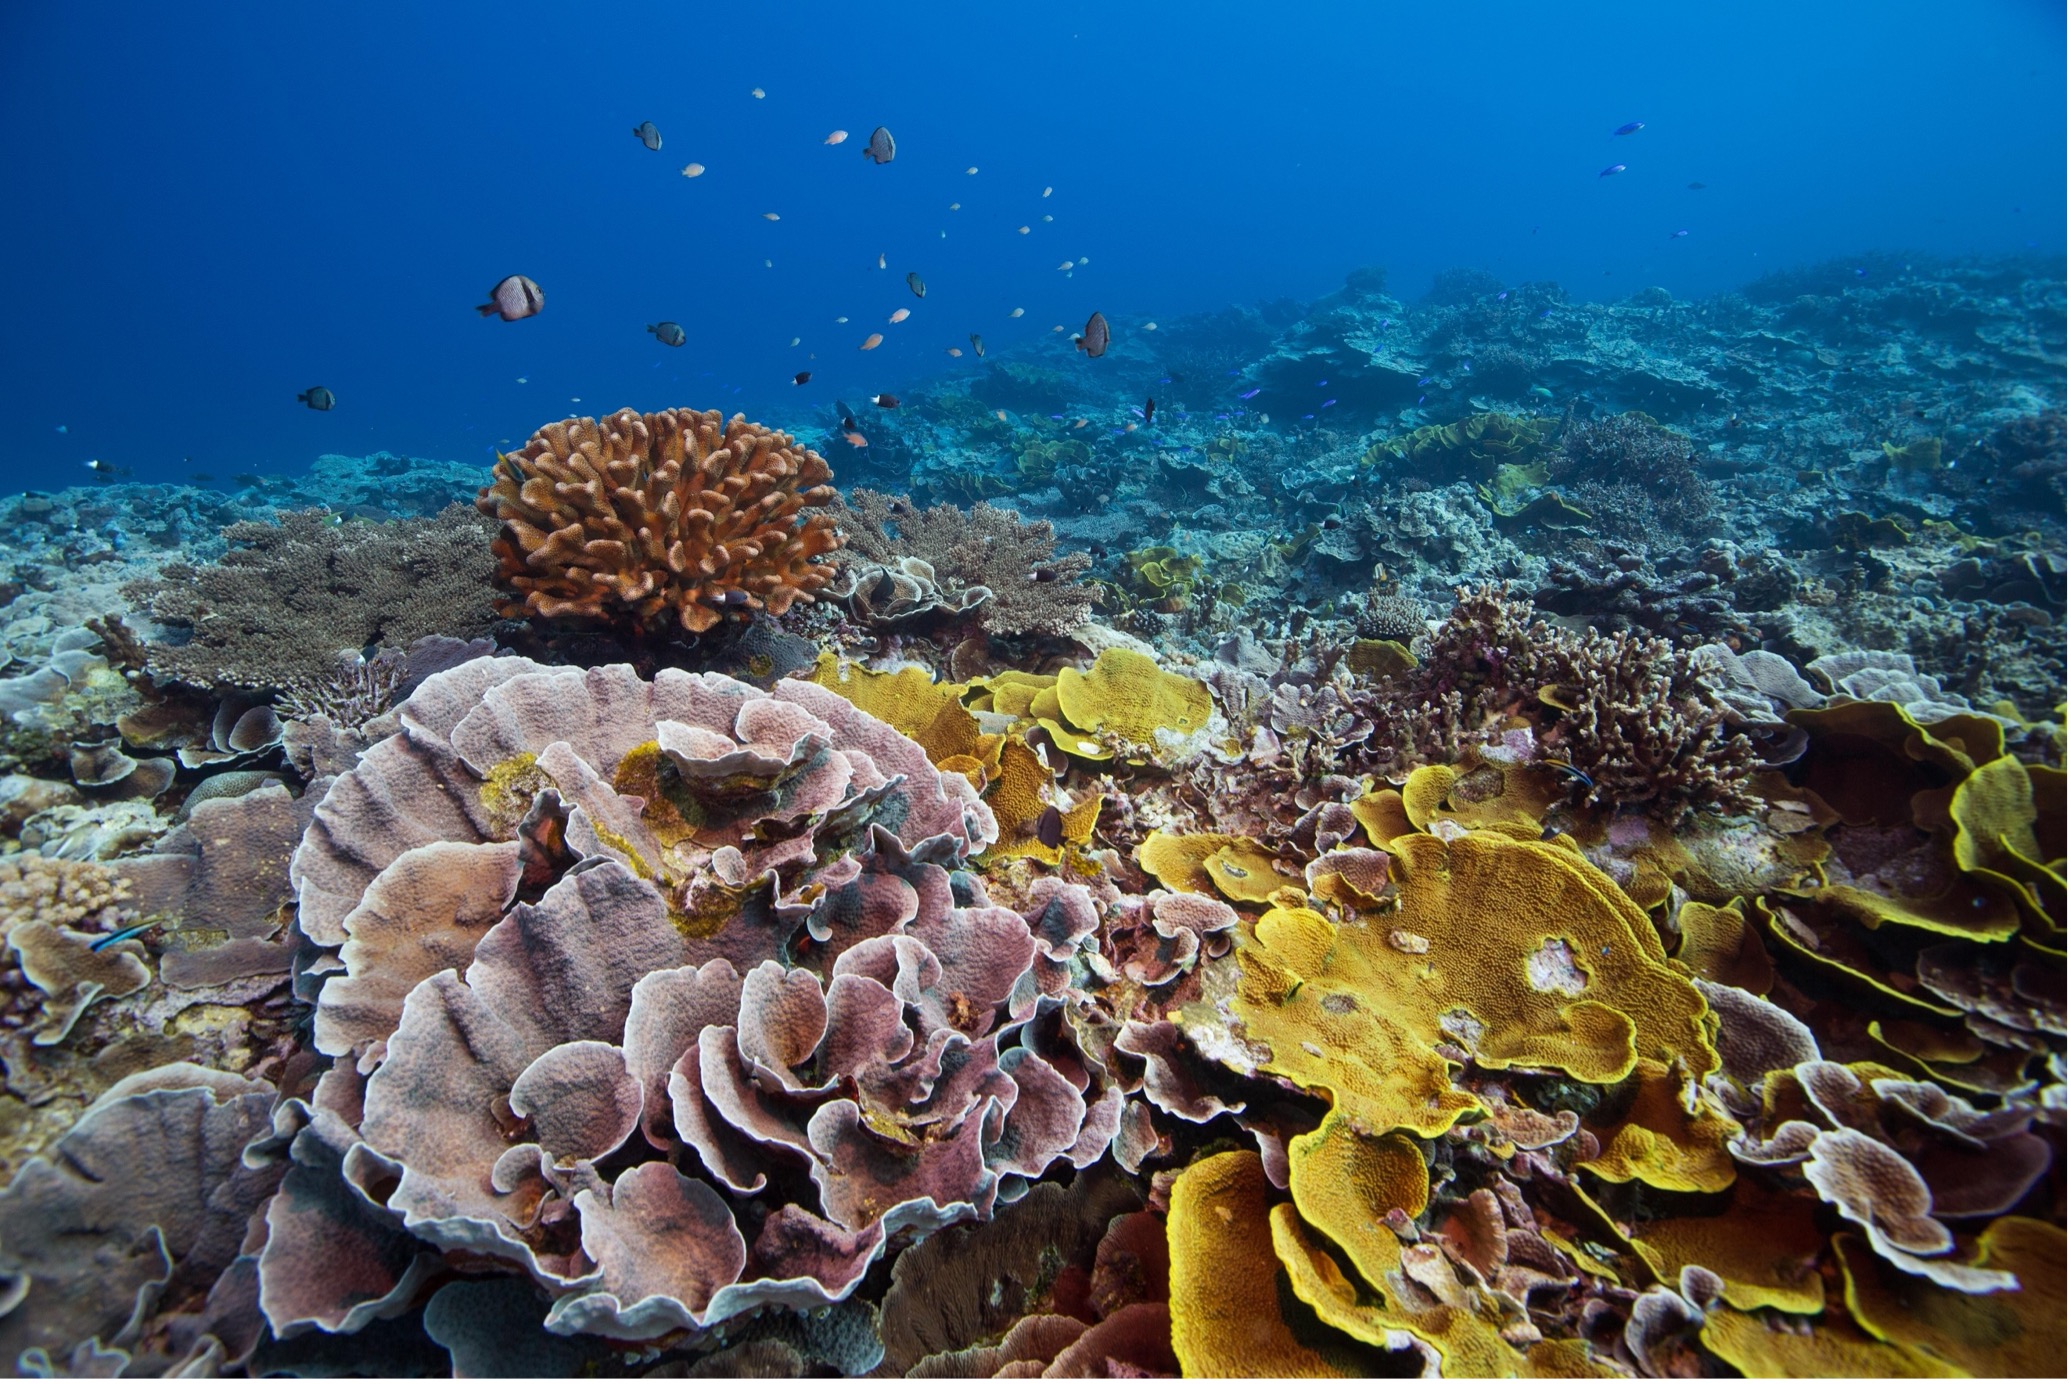 Diverse and resilient reef in Yap, Micronesia. By Tim Calver.